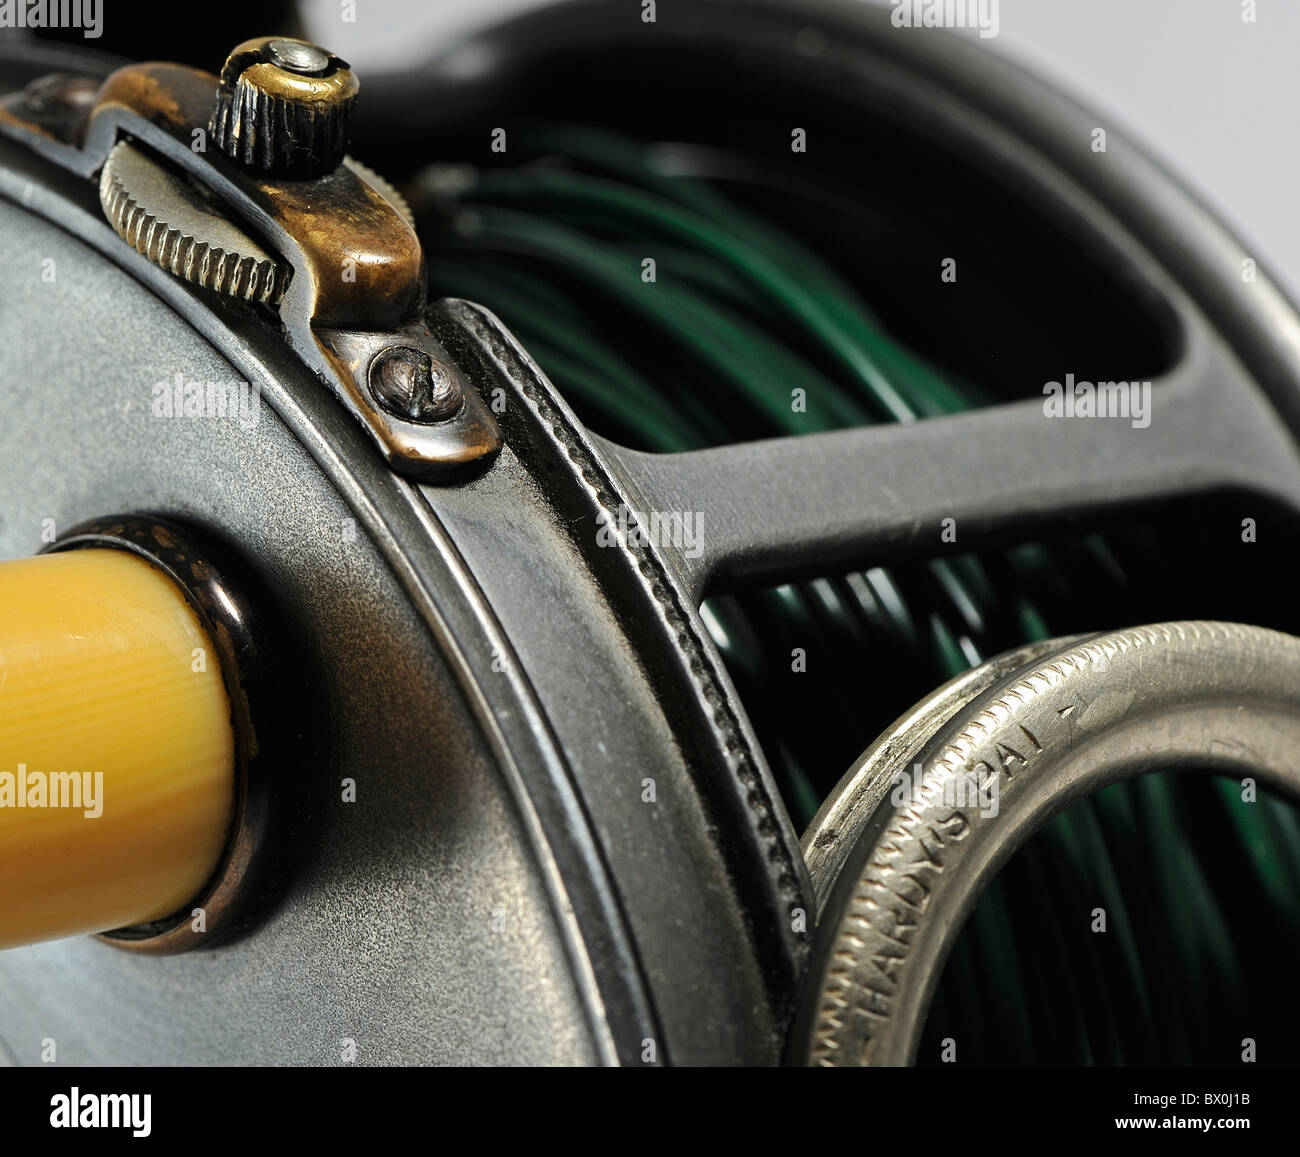 Hardy Perfect antique Salmon fly fishing reel detail against a plain white  background Stock Photo - Alamy